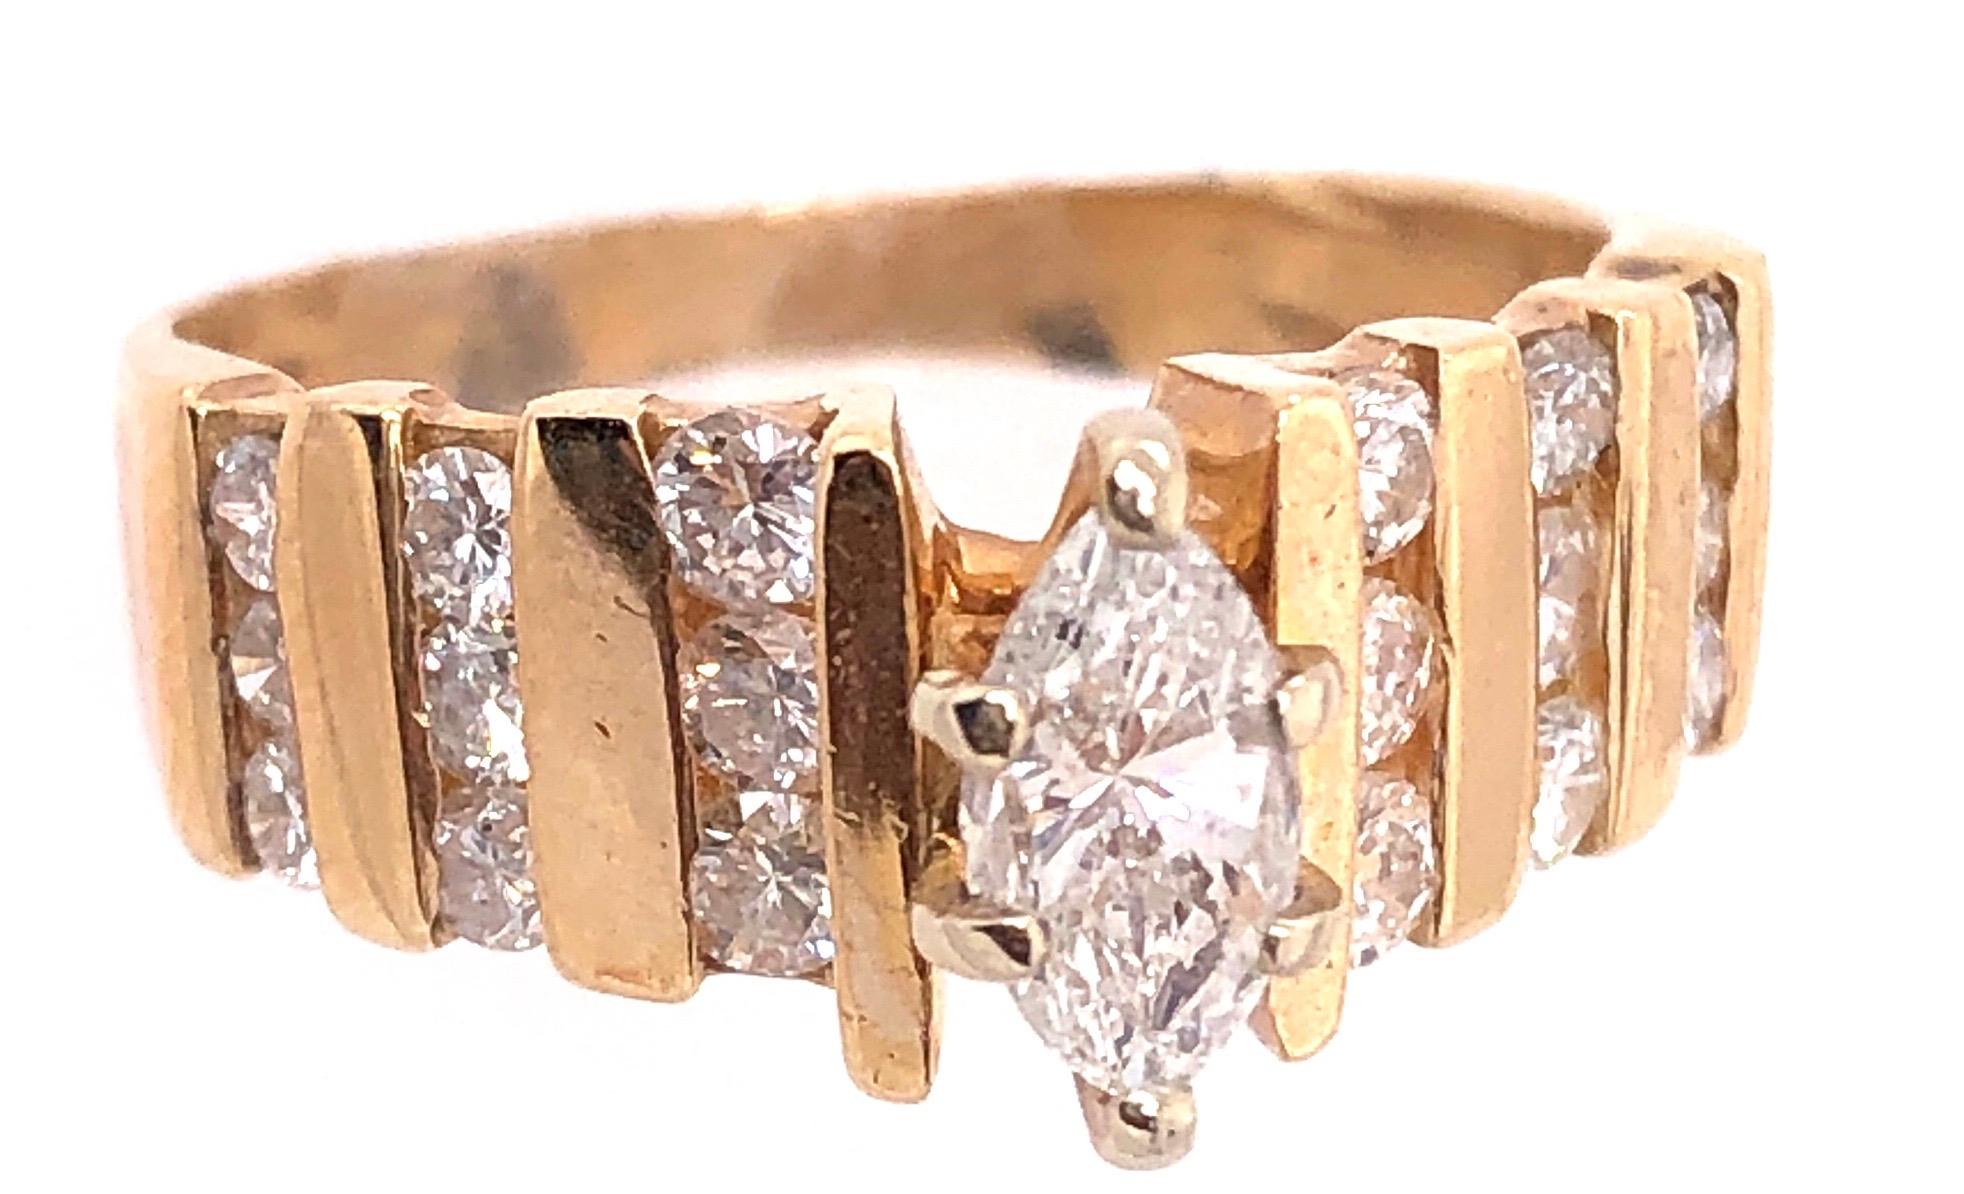 14 Karat Yellow Gold Engagement Ring with 1.50 Total Diamond Weight
Size 6.75
4.52 grams total weight.